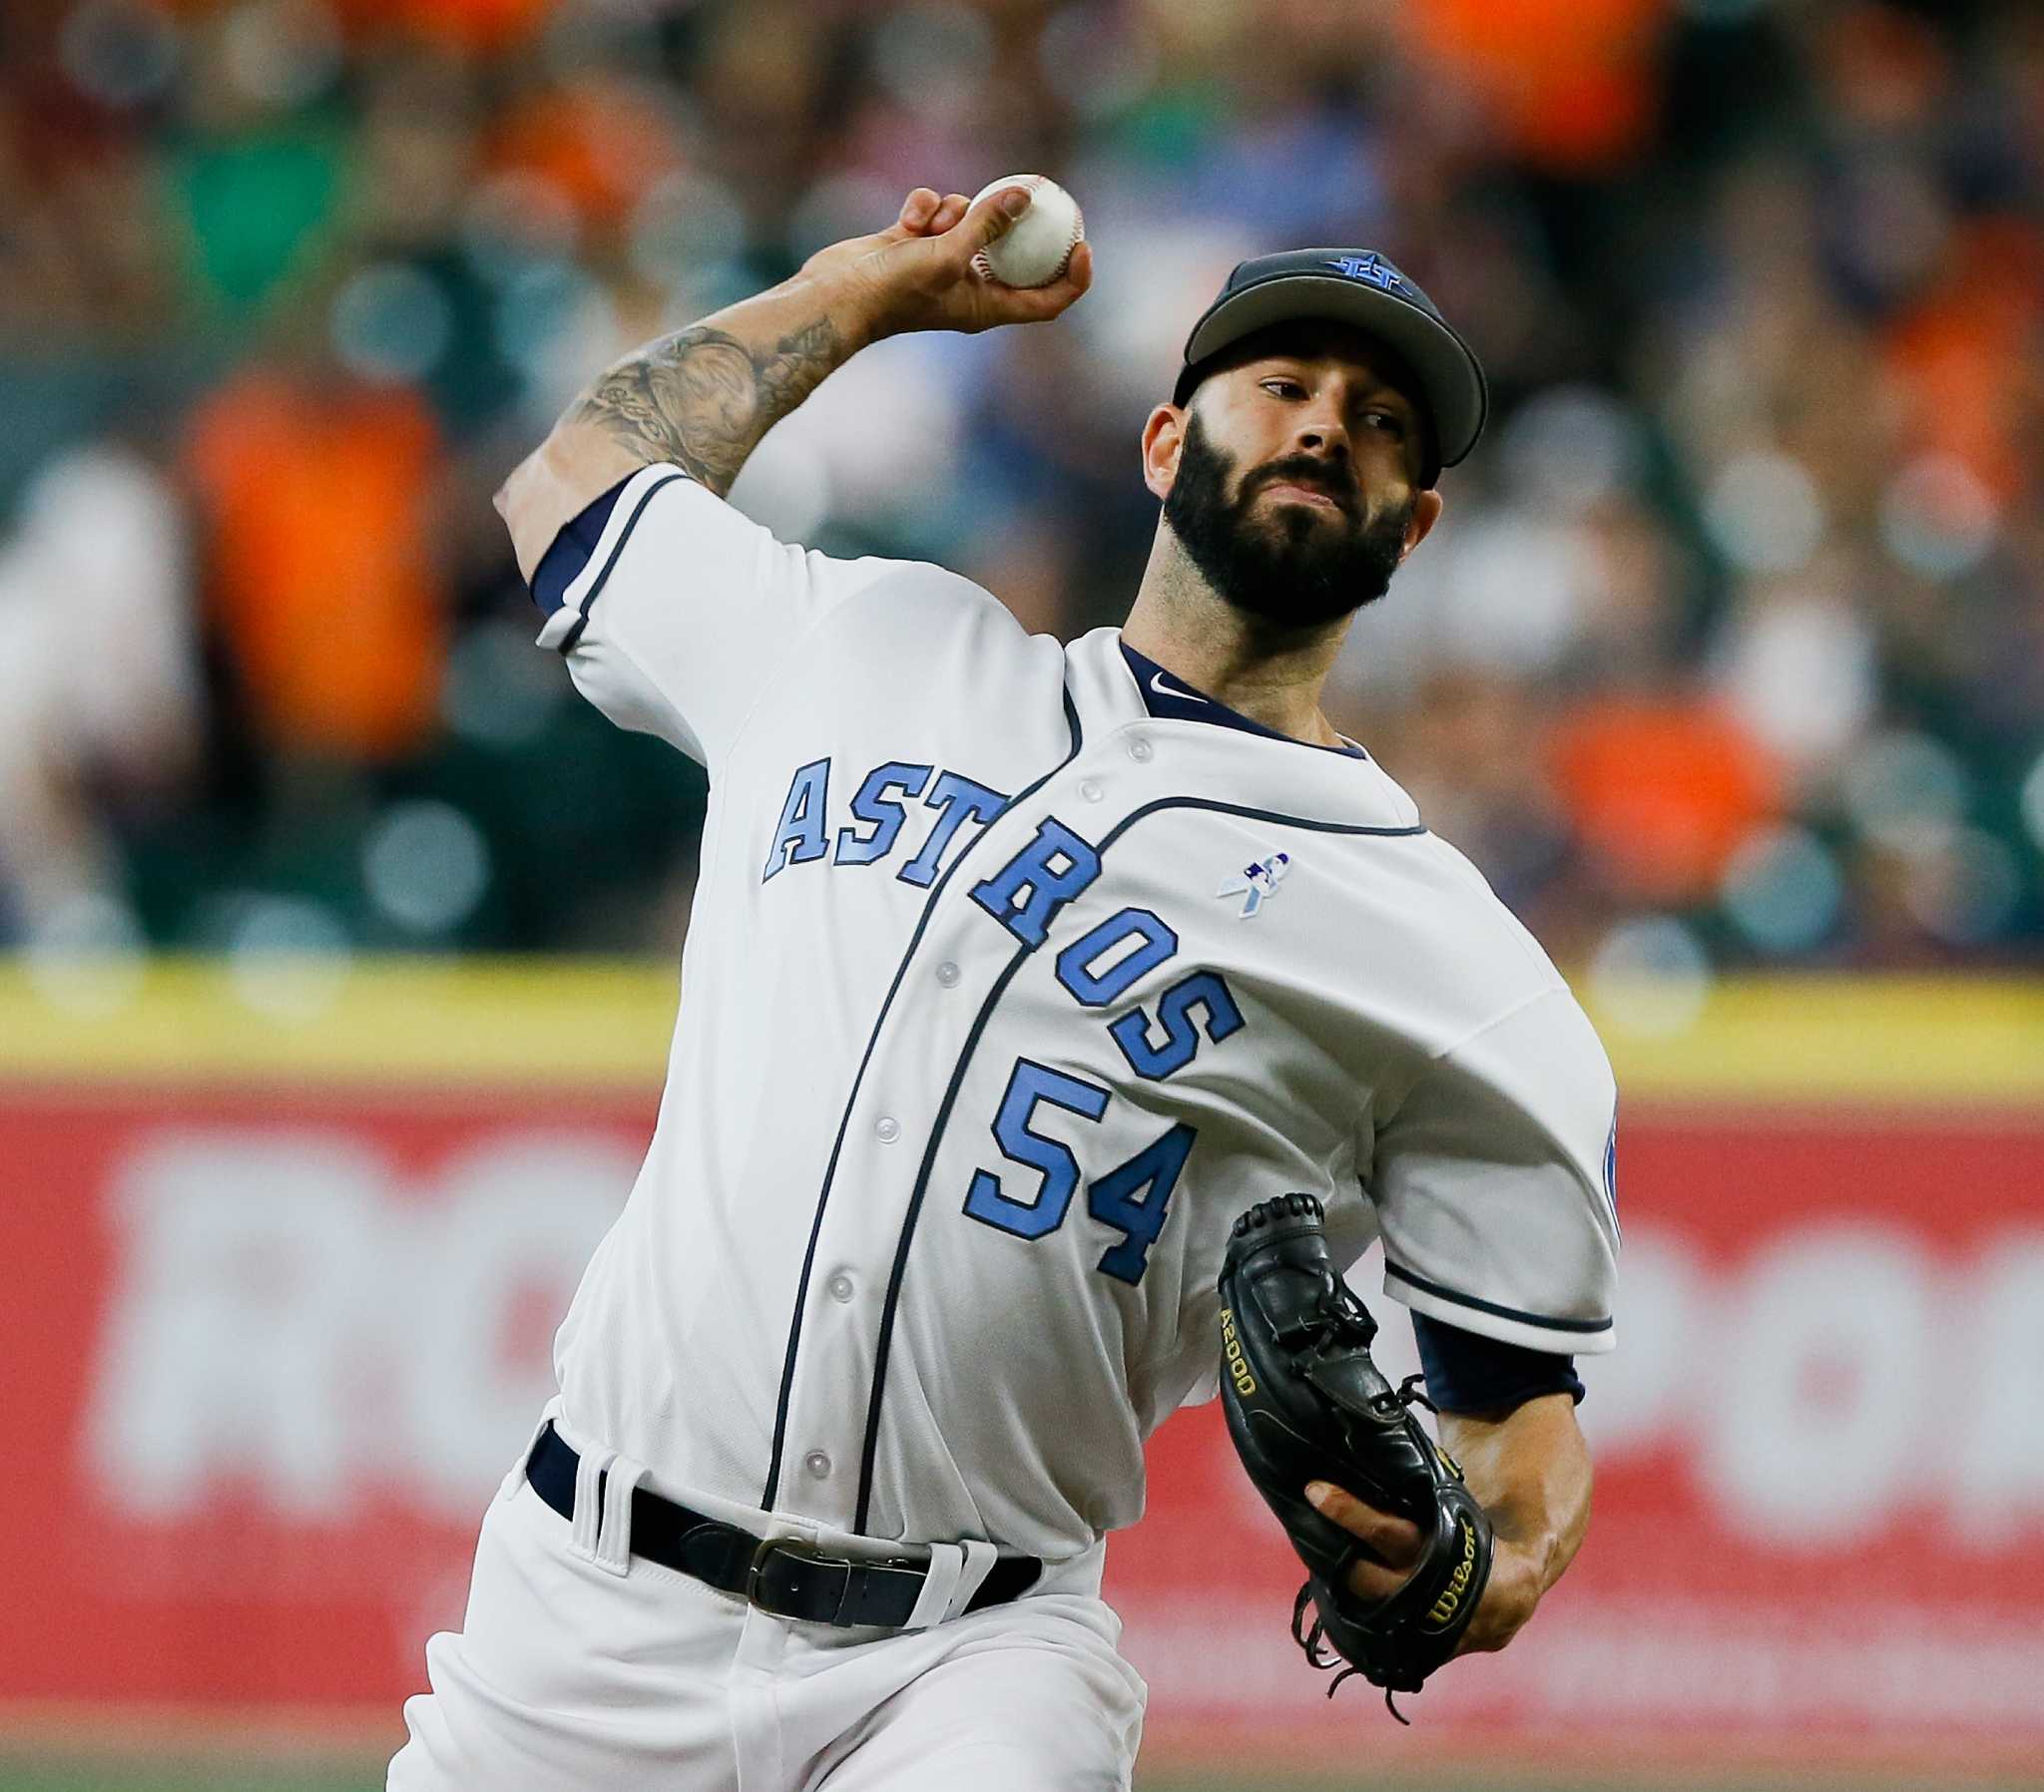 Dallas Keuchel outduels Mike Fiers in Astros' win over Tigers